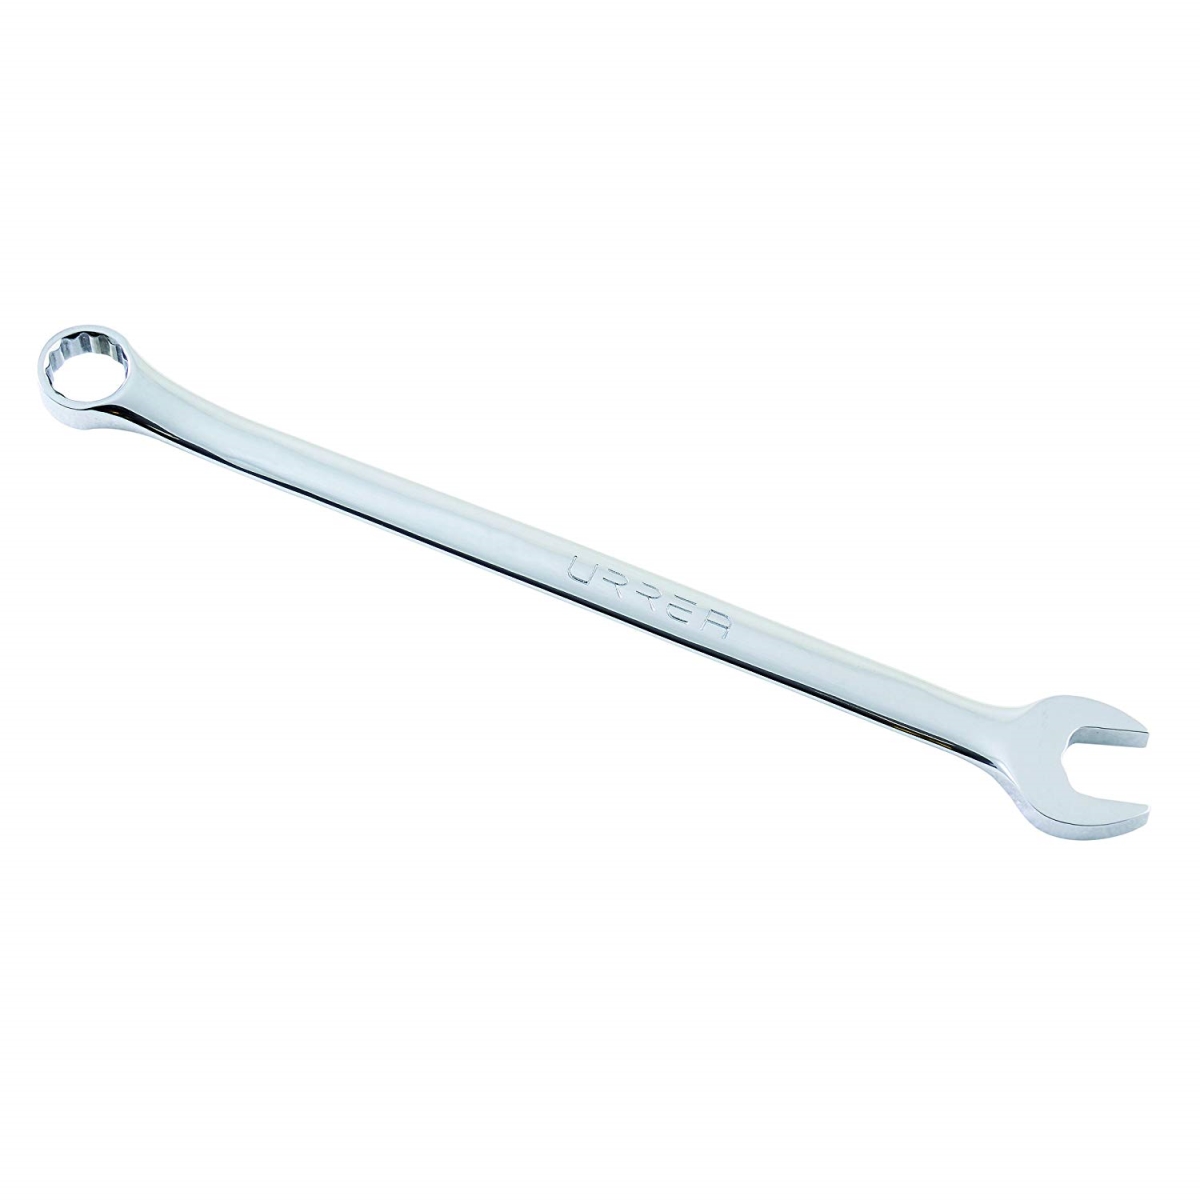 Mst92114 14 Mm Extra Long Metric Combination Wrench